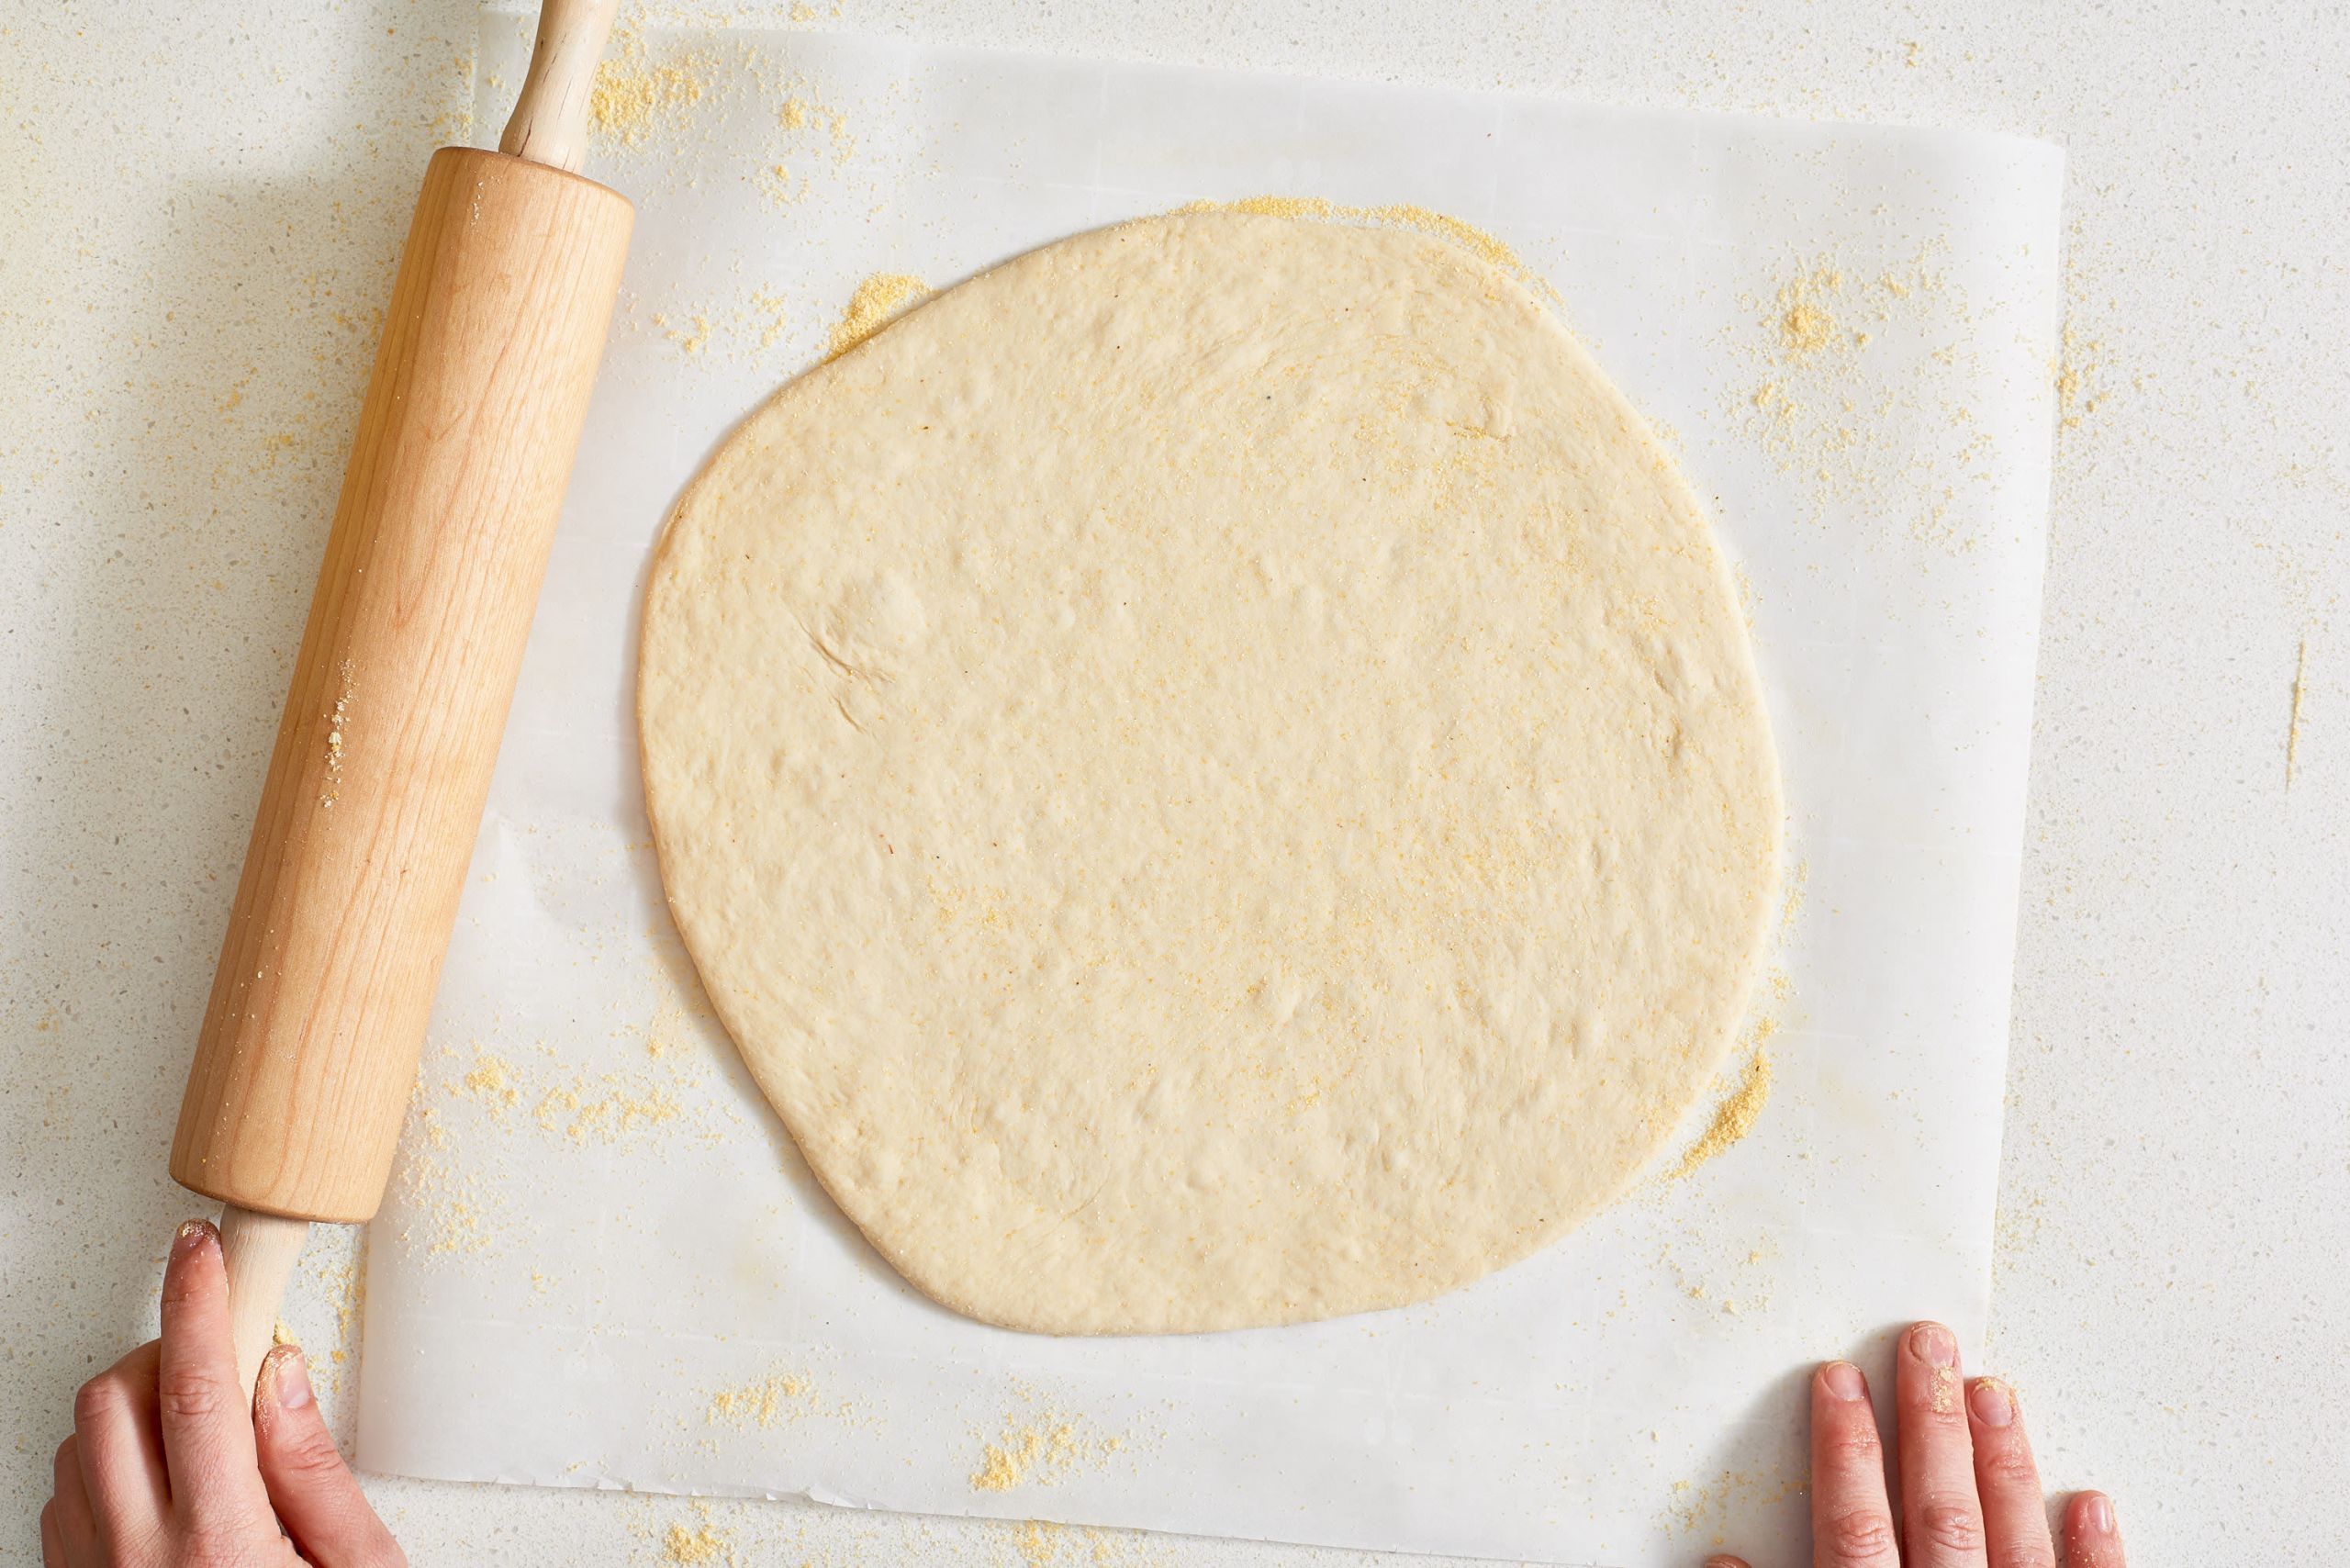 Pizza Dough Recipe By Hand
 How To Make the Best Basic Pizza Dough